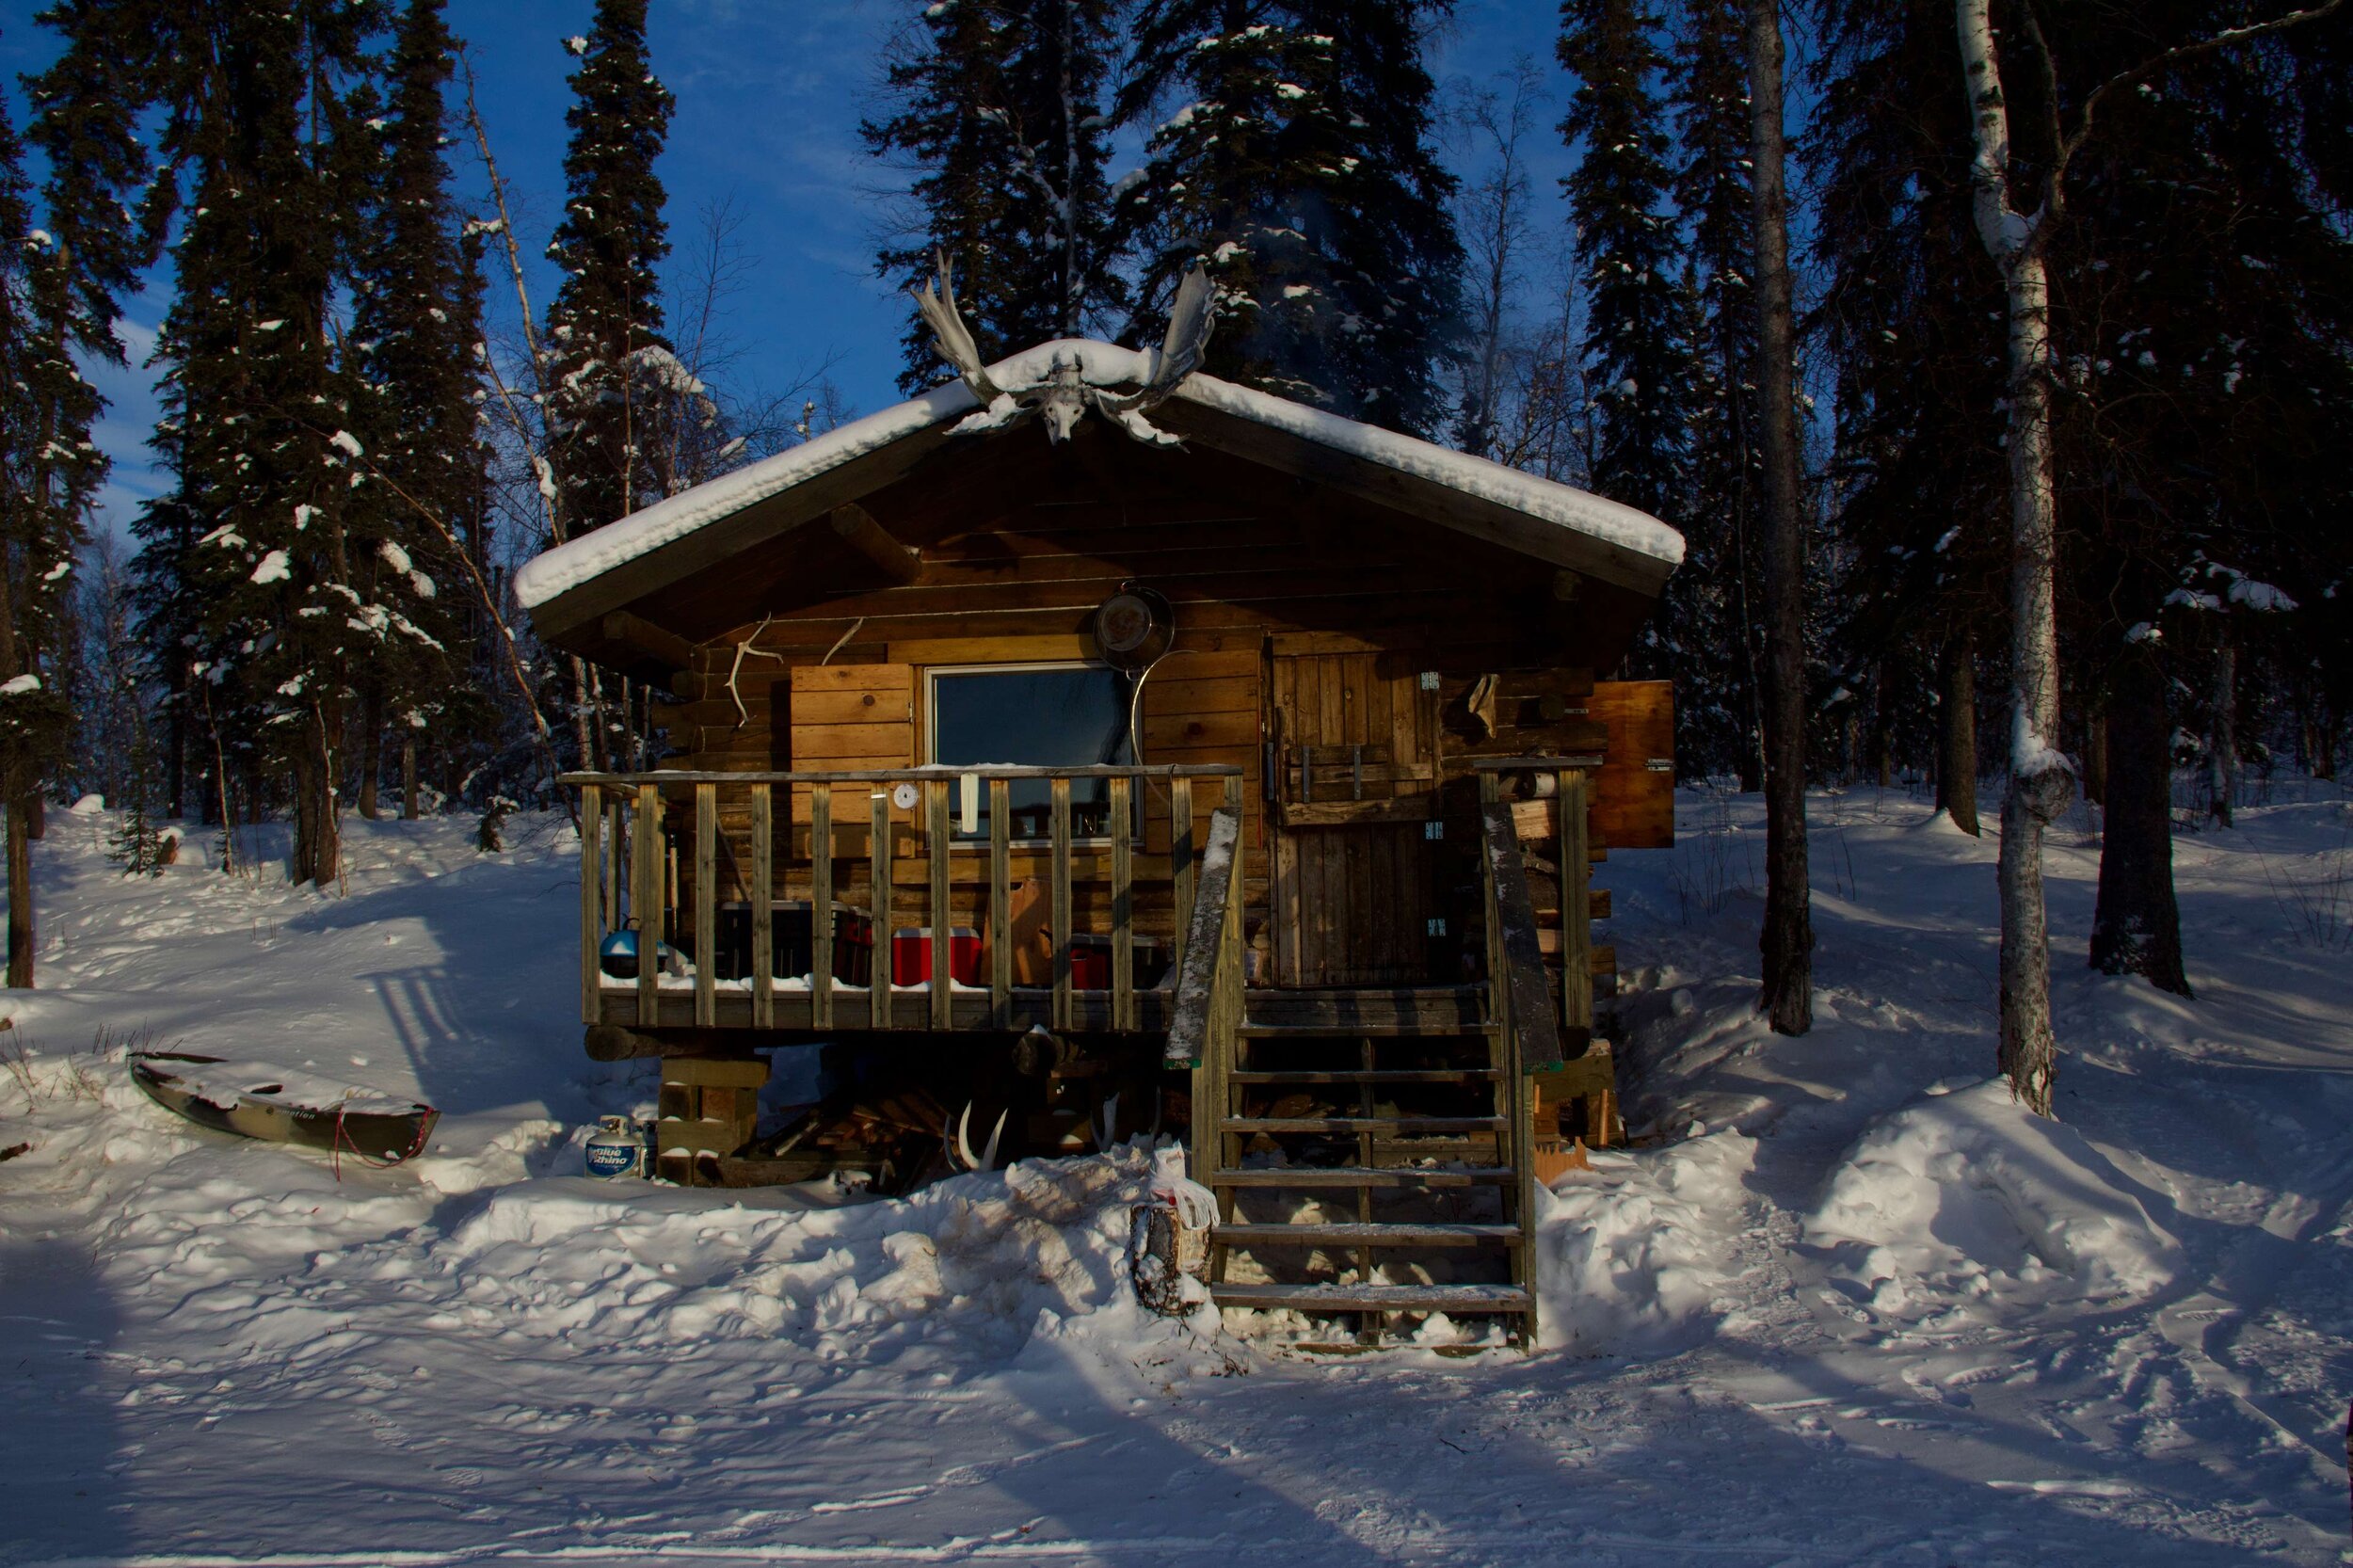  A small, remote, snow-covered log cabin in Tetlin National Wildlife Refuge with pine trees and blue skies that fill the background.  